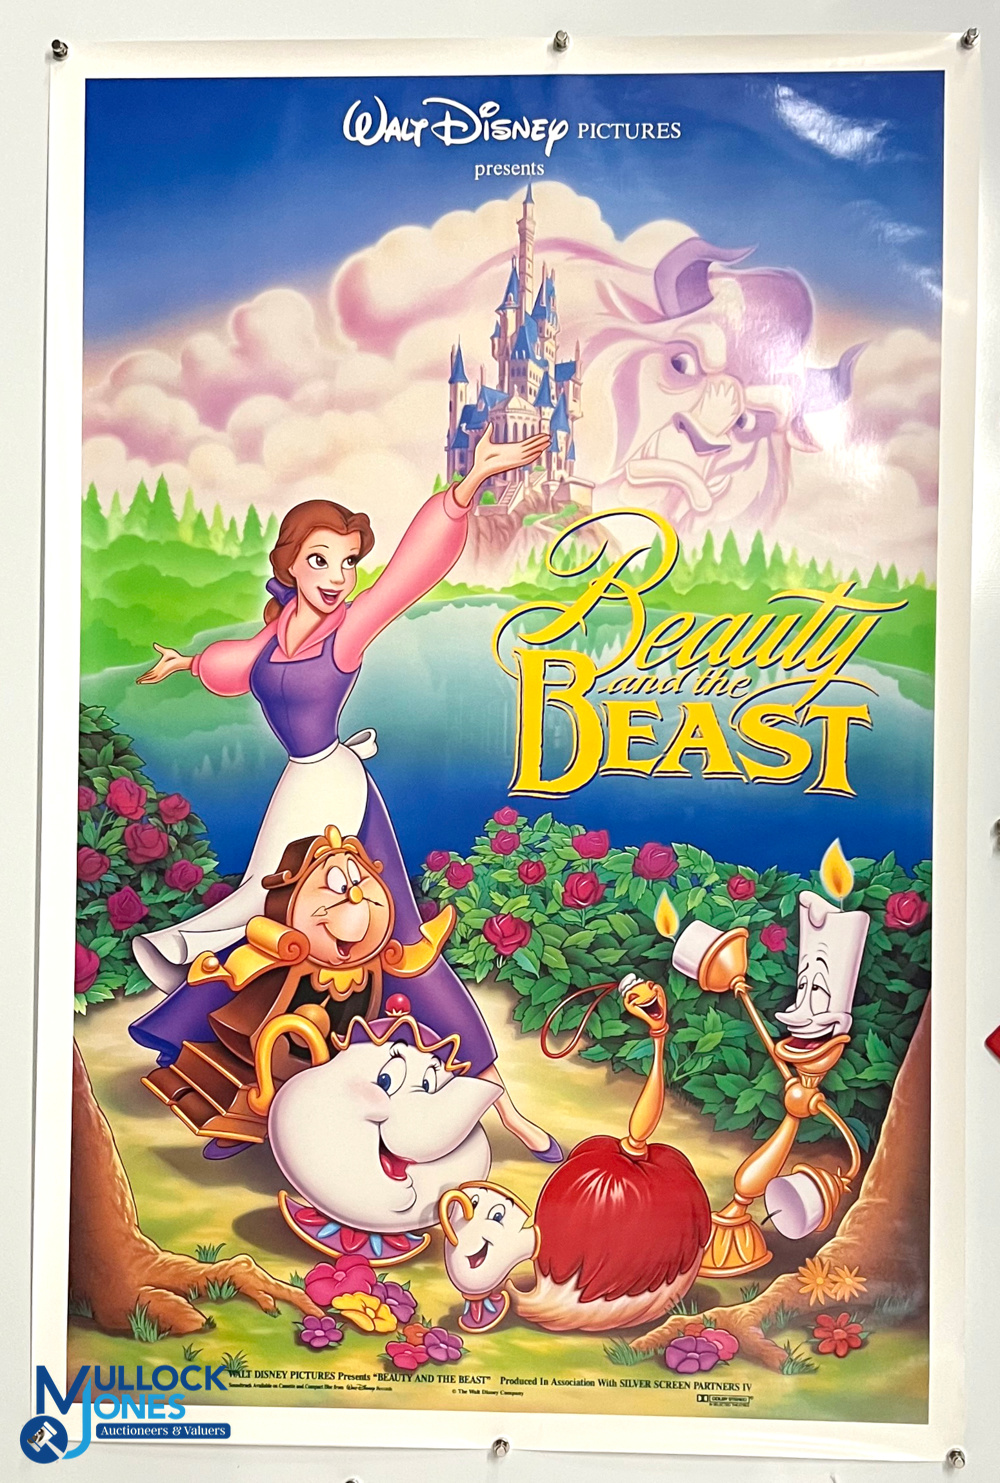 Original Movie /Film Posters (6) - Peter Pan, 1991 Beauty and the Beast, 1991 The Last Boy Scout, - Image 2 of 6